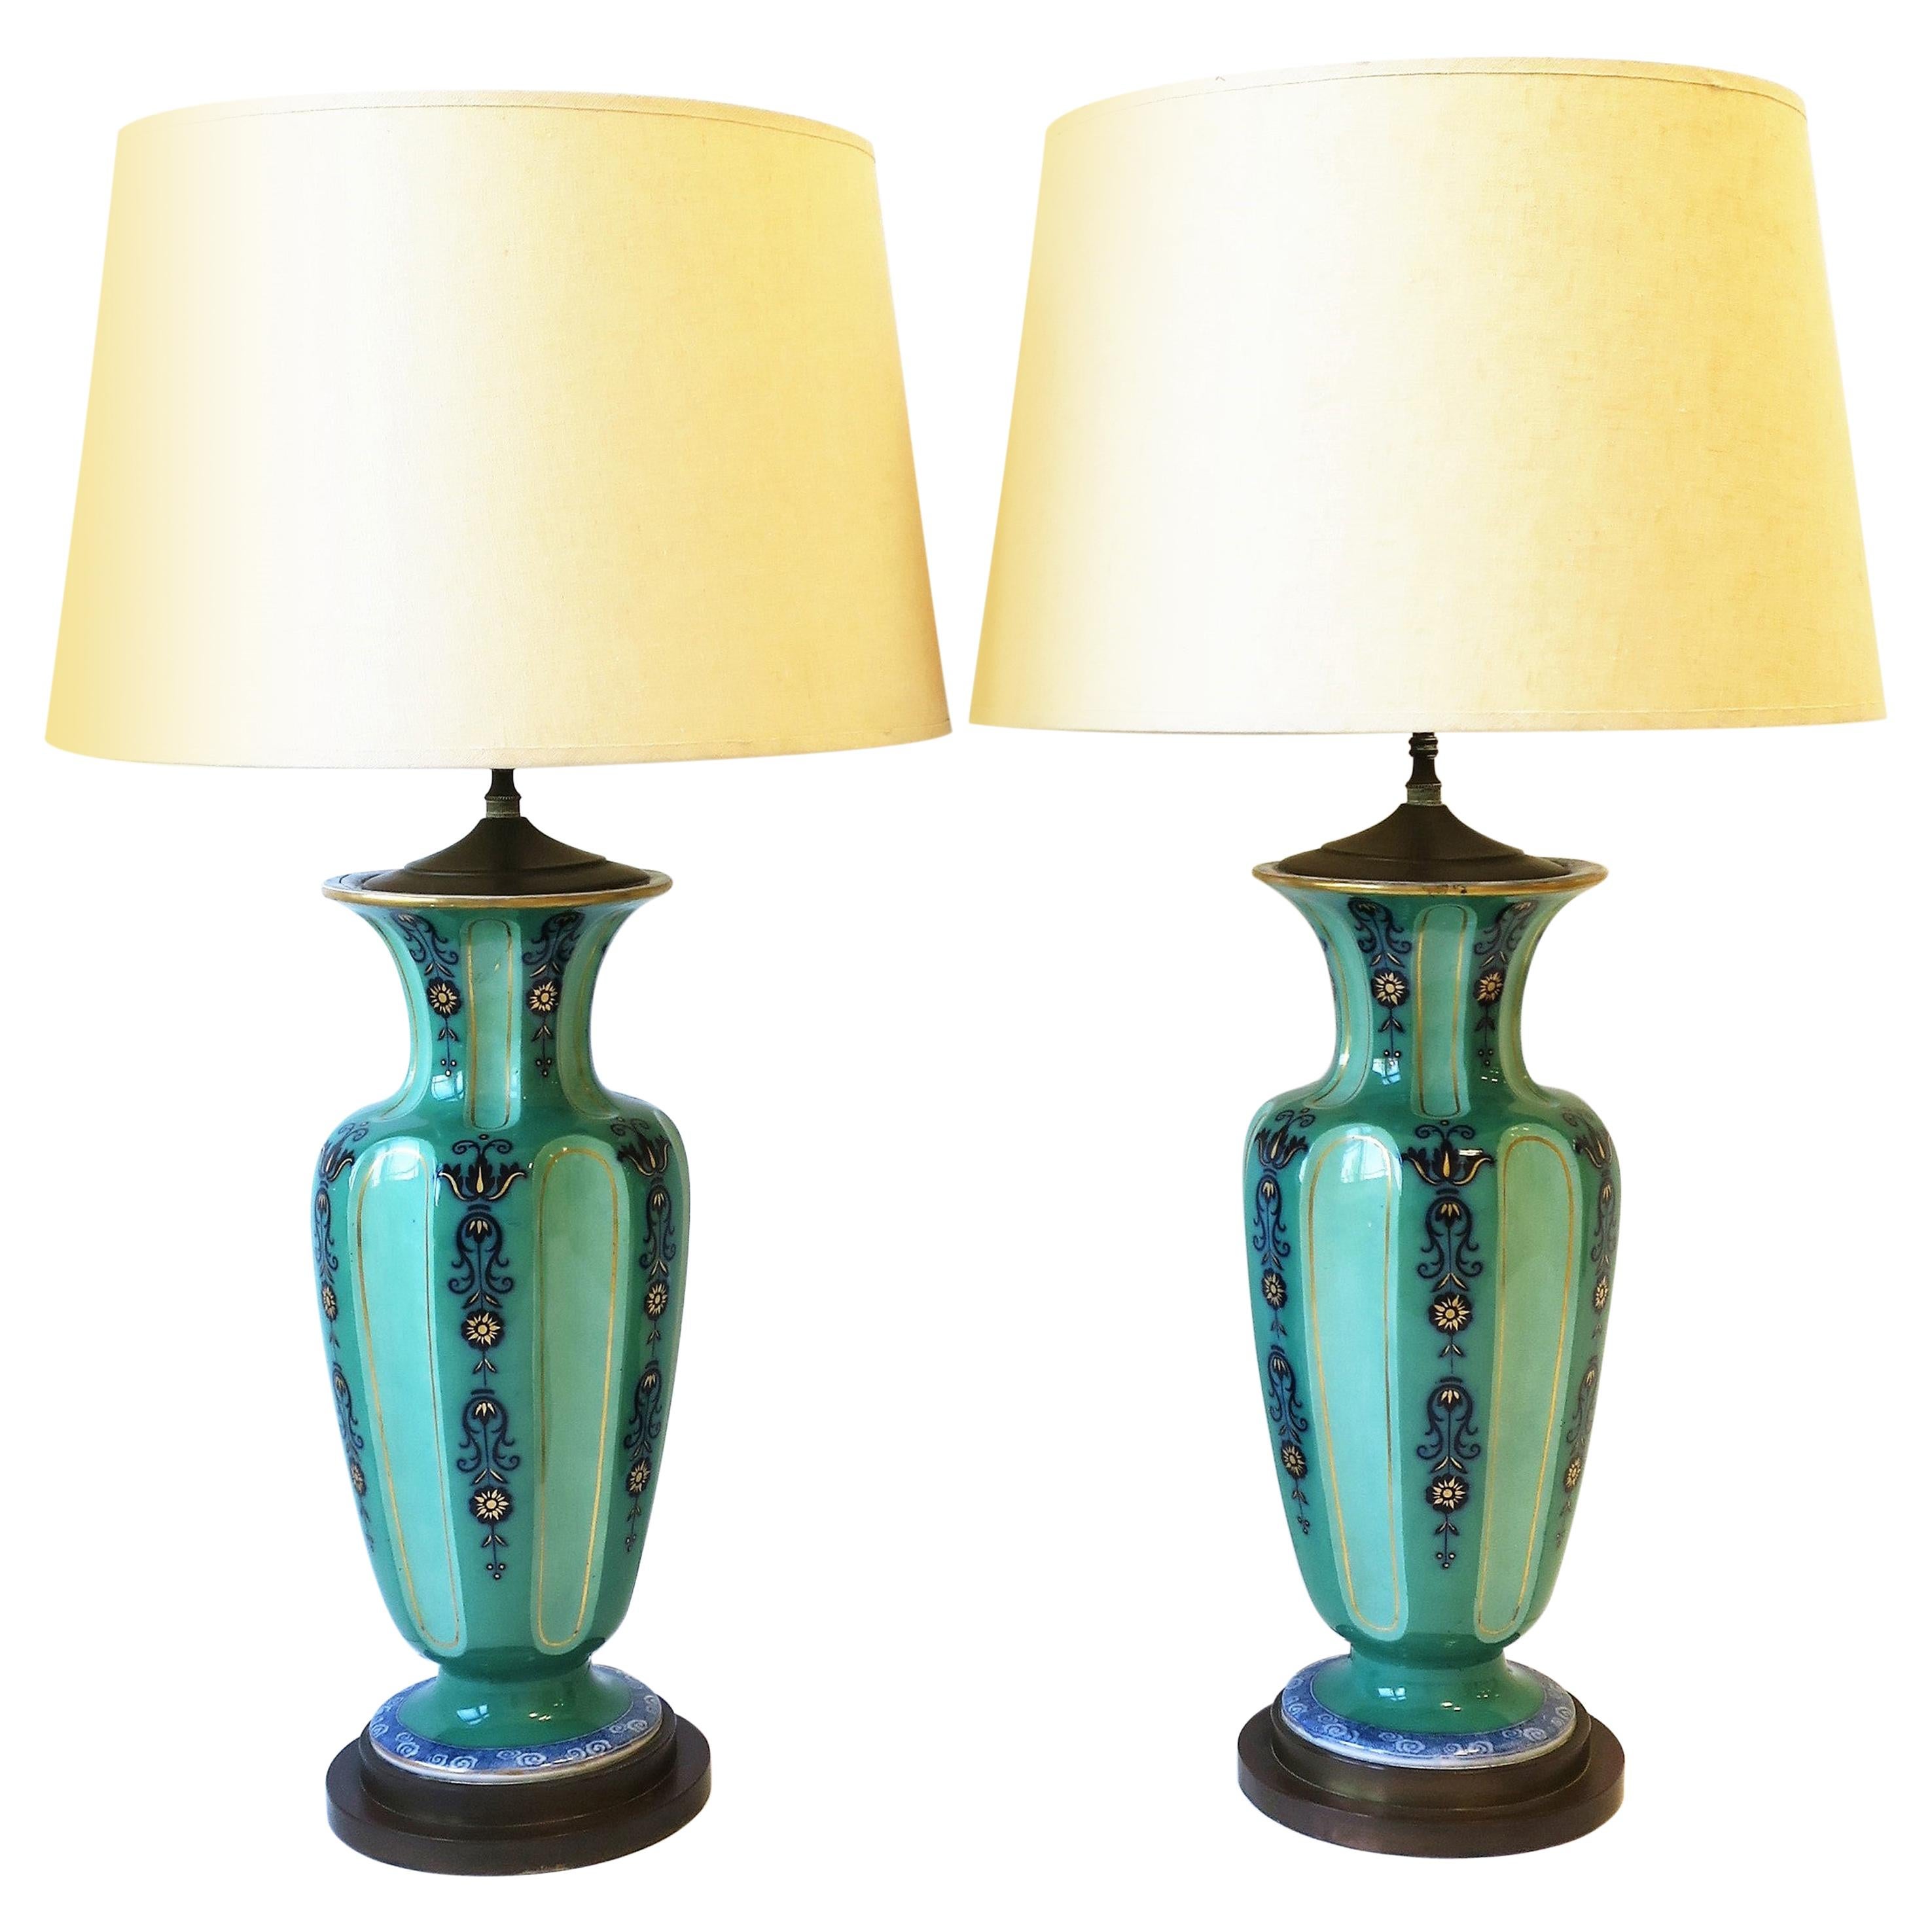 Dutch Blue White Green Ceramic Table Lamps Ginger Jar Style, circa 1930s For Sale